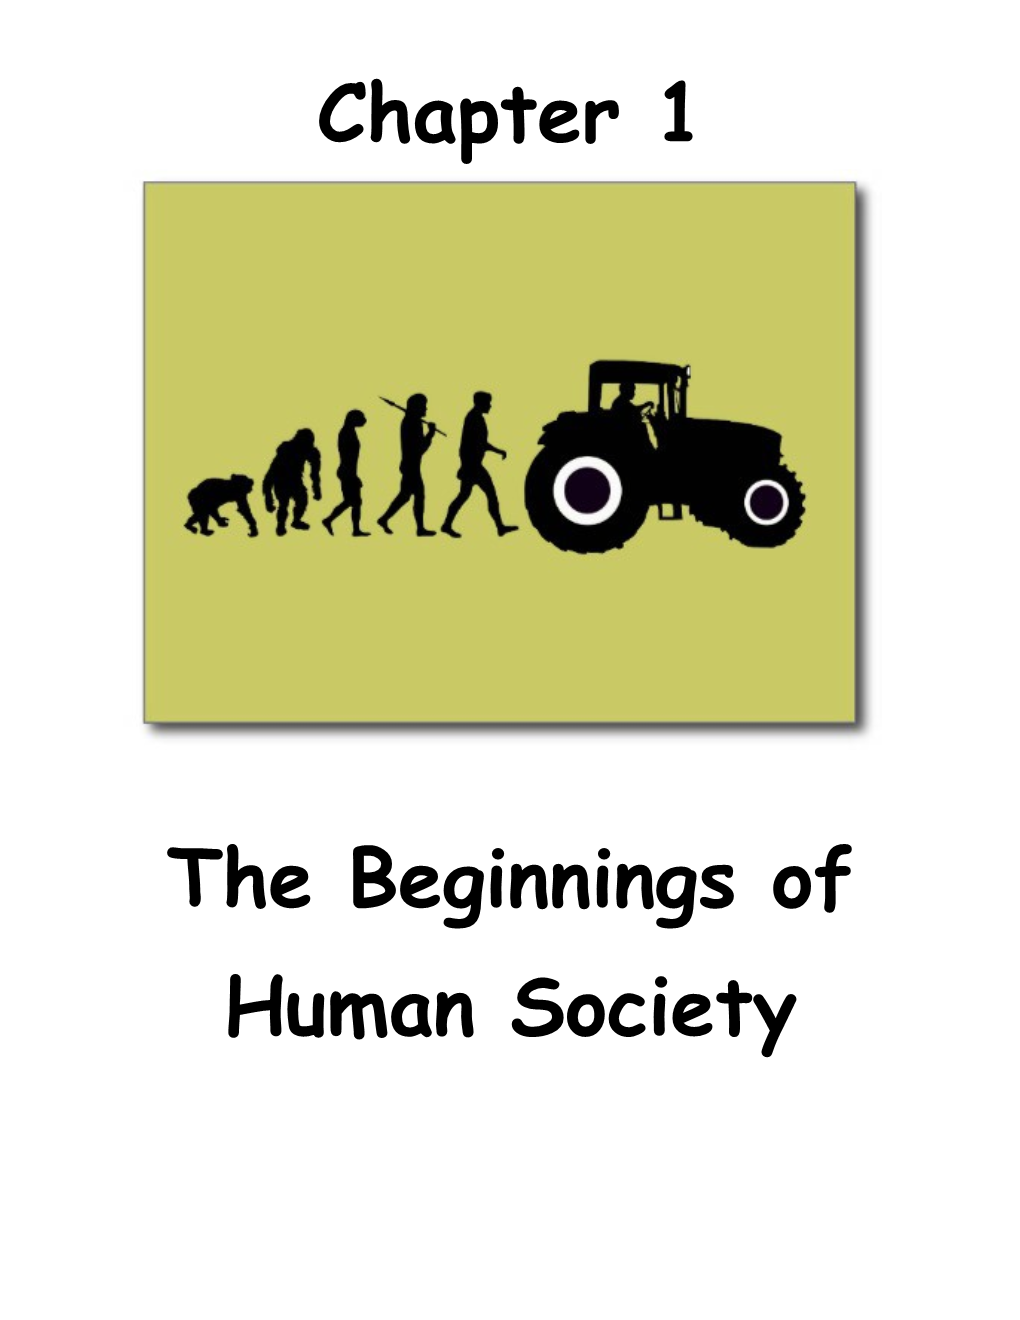 The Beginnings of Human Society